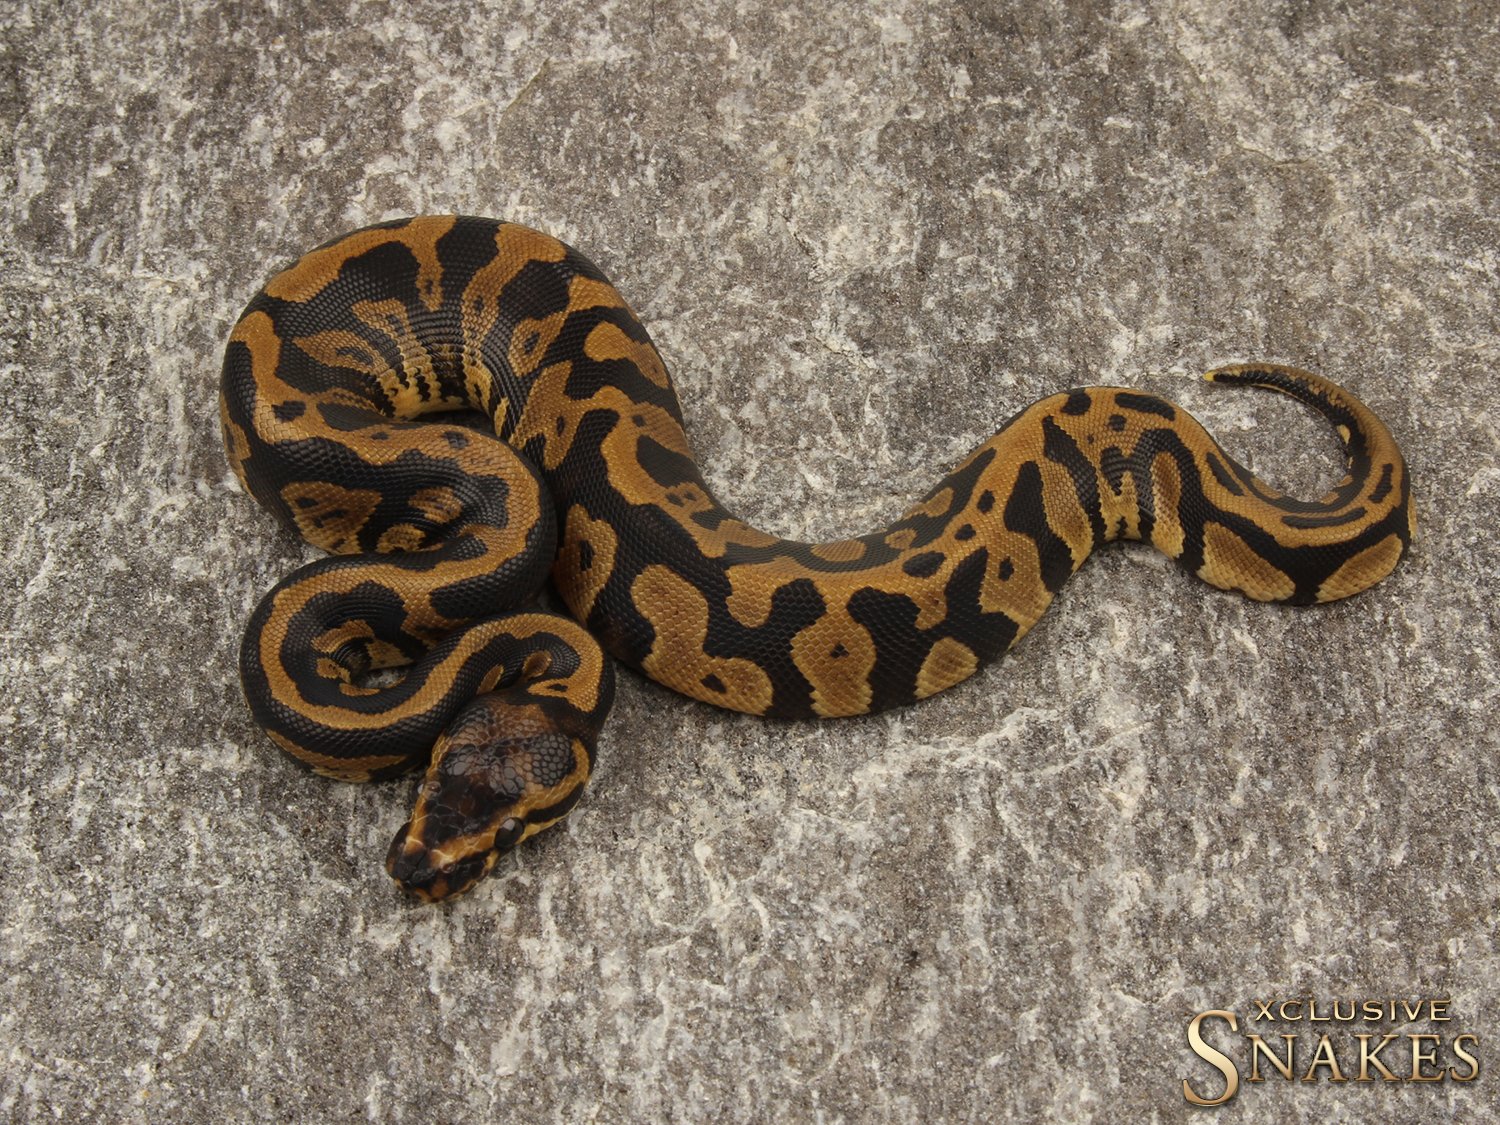 Confusion Ball Python by Xclusive Snakes